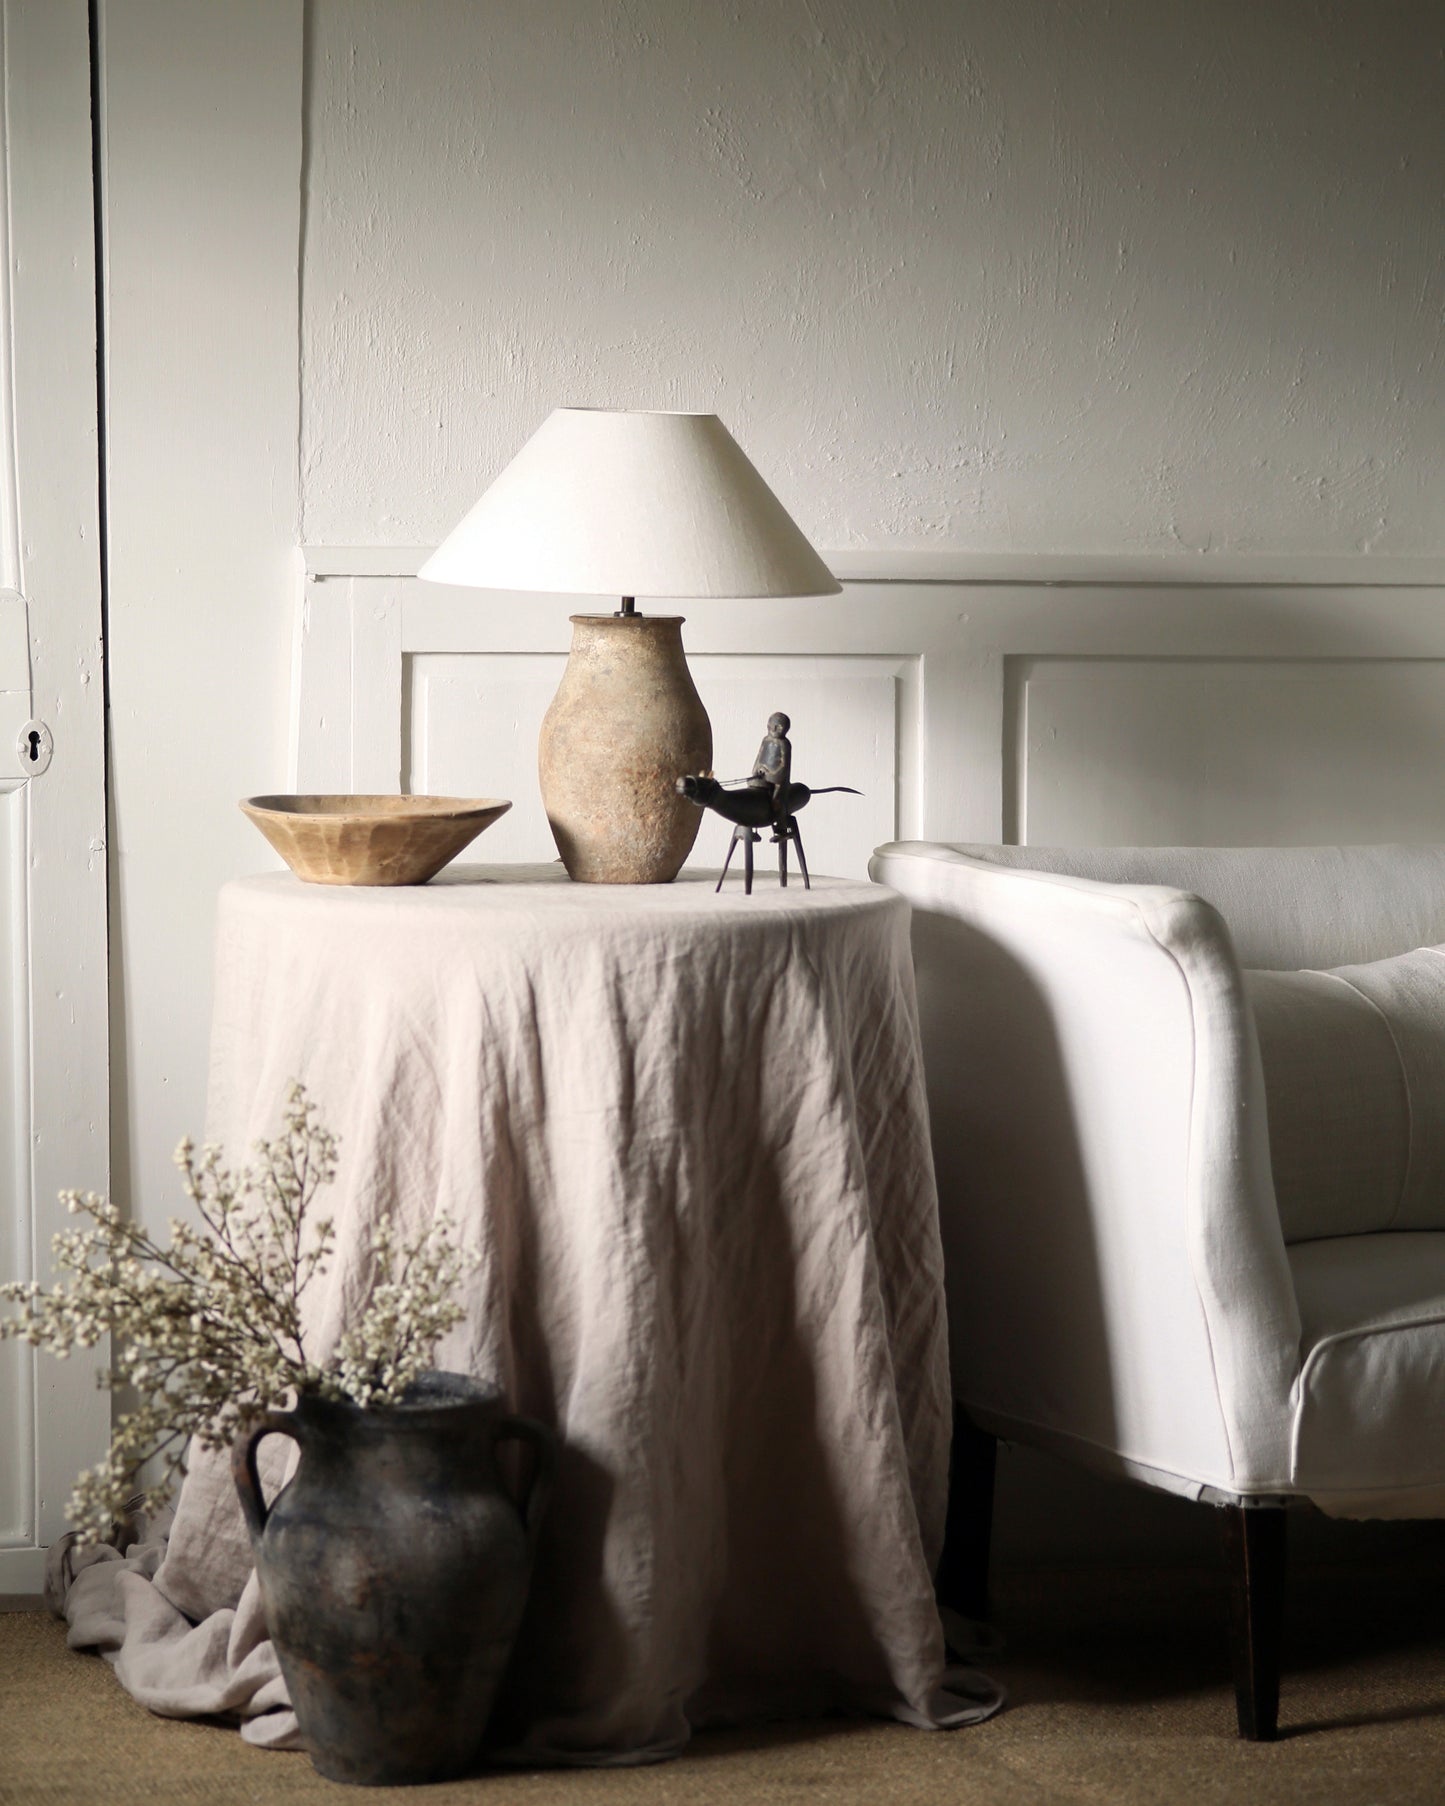 Antique table lamp with white linen shade in country home styled with antique accessories and furniture